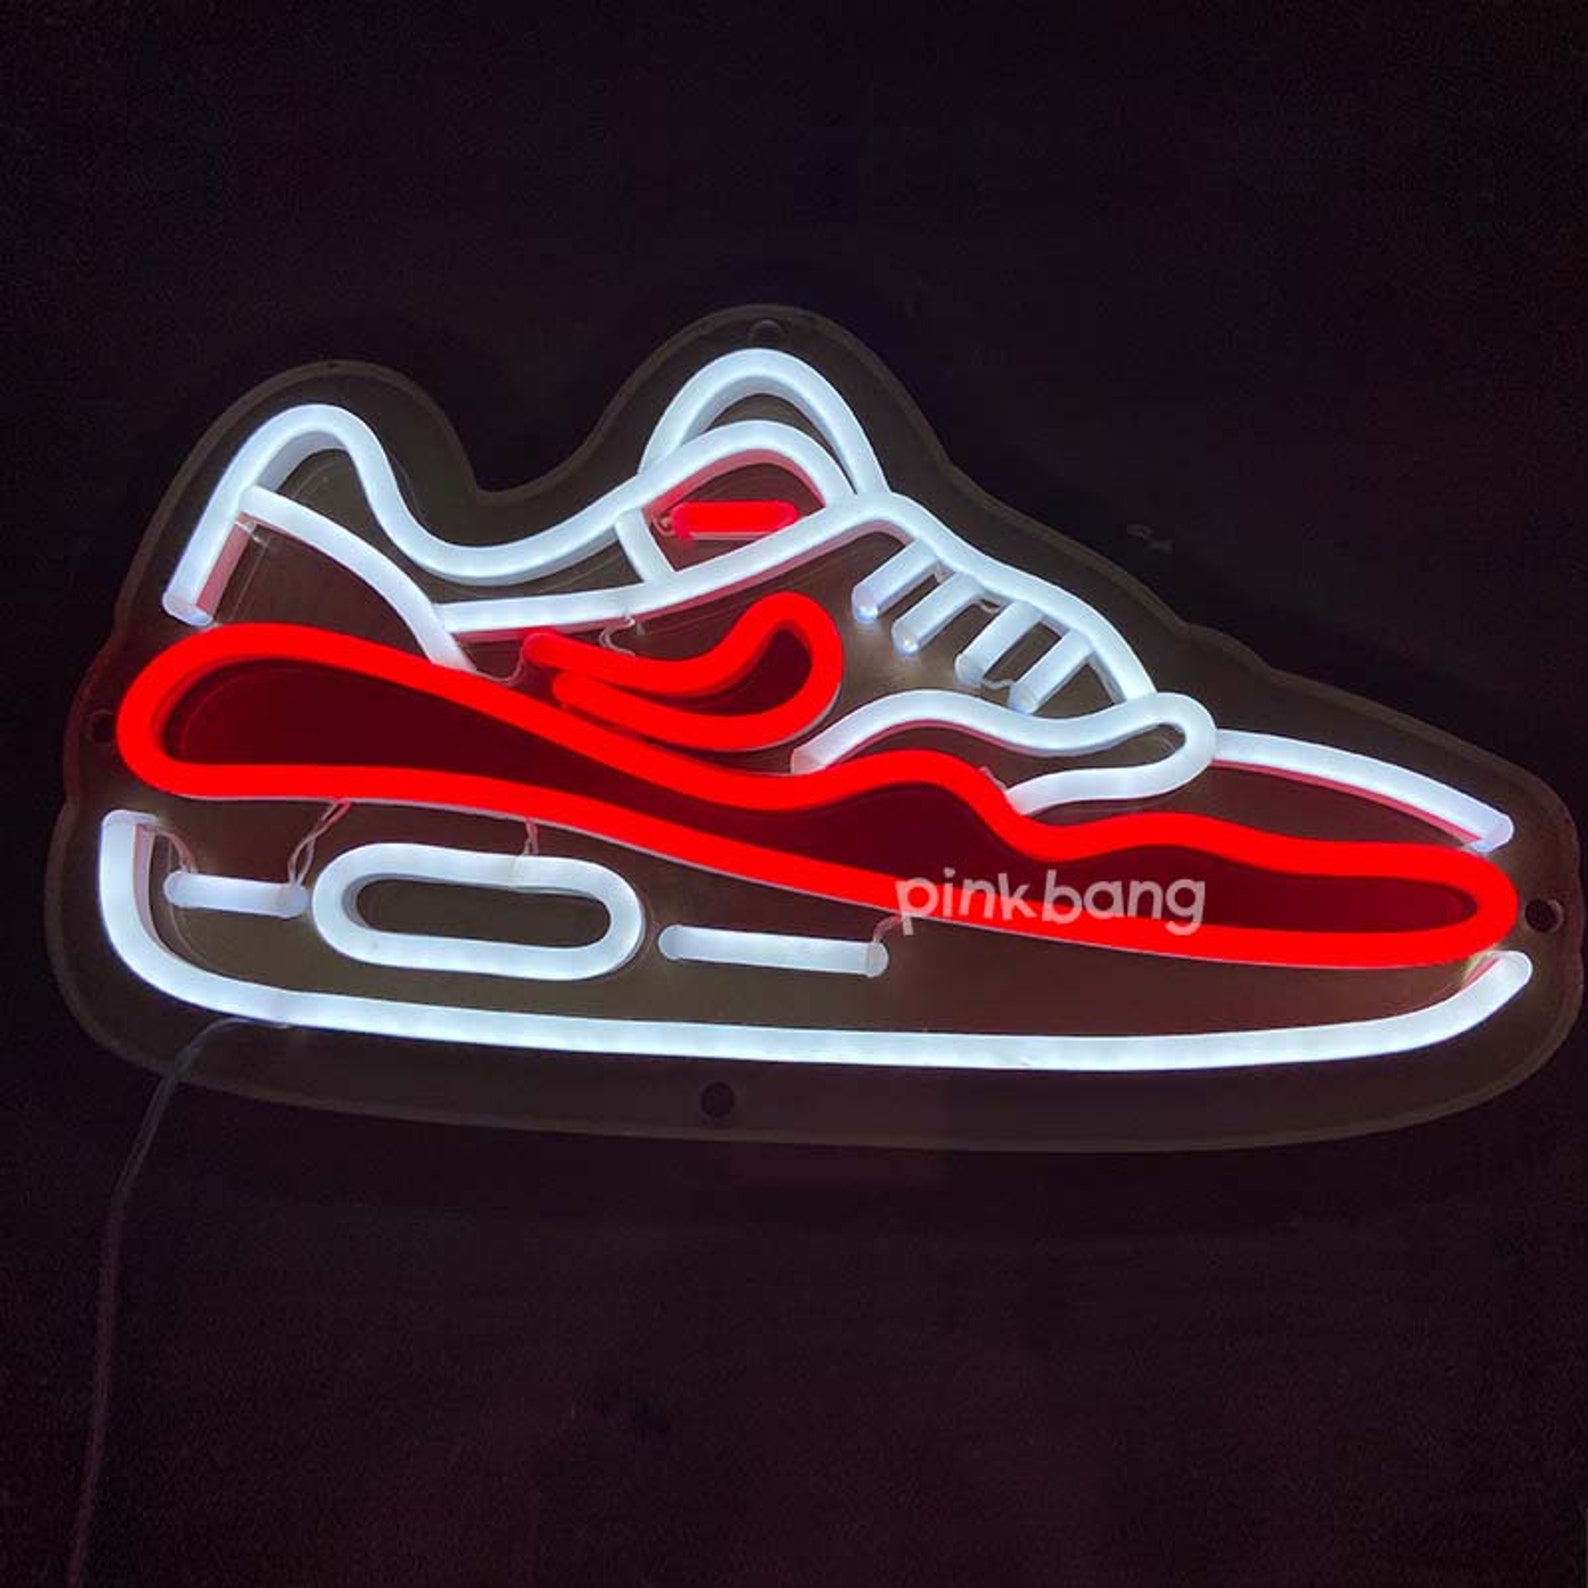 LED neon sign nike air neon sign | Etsy